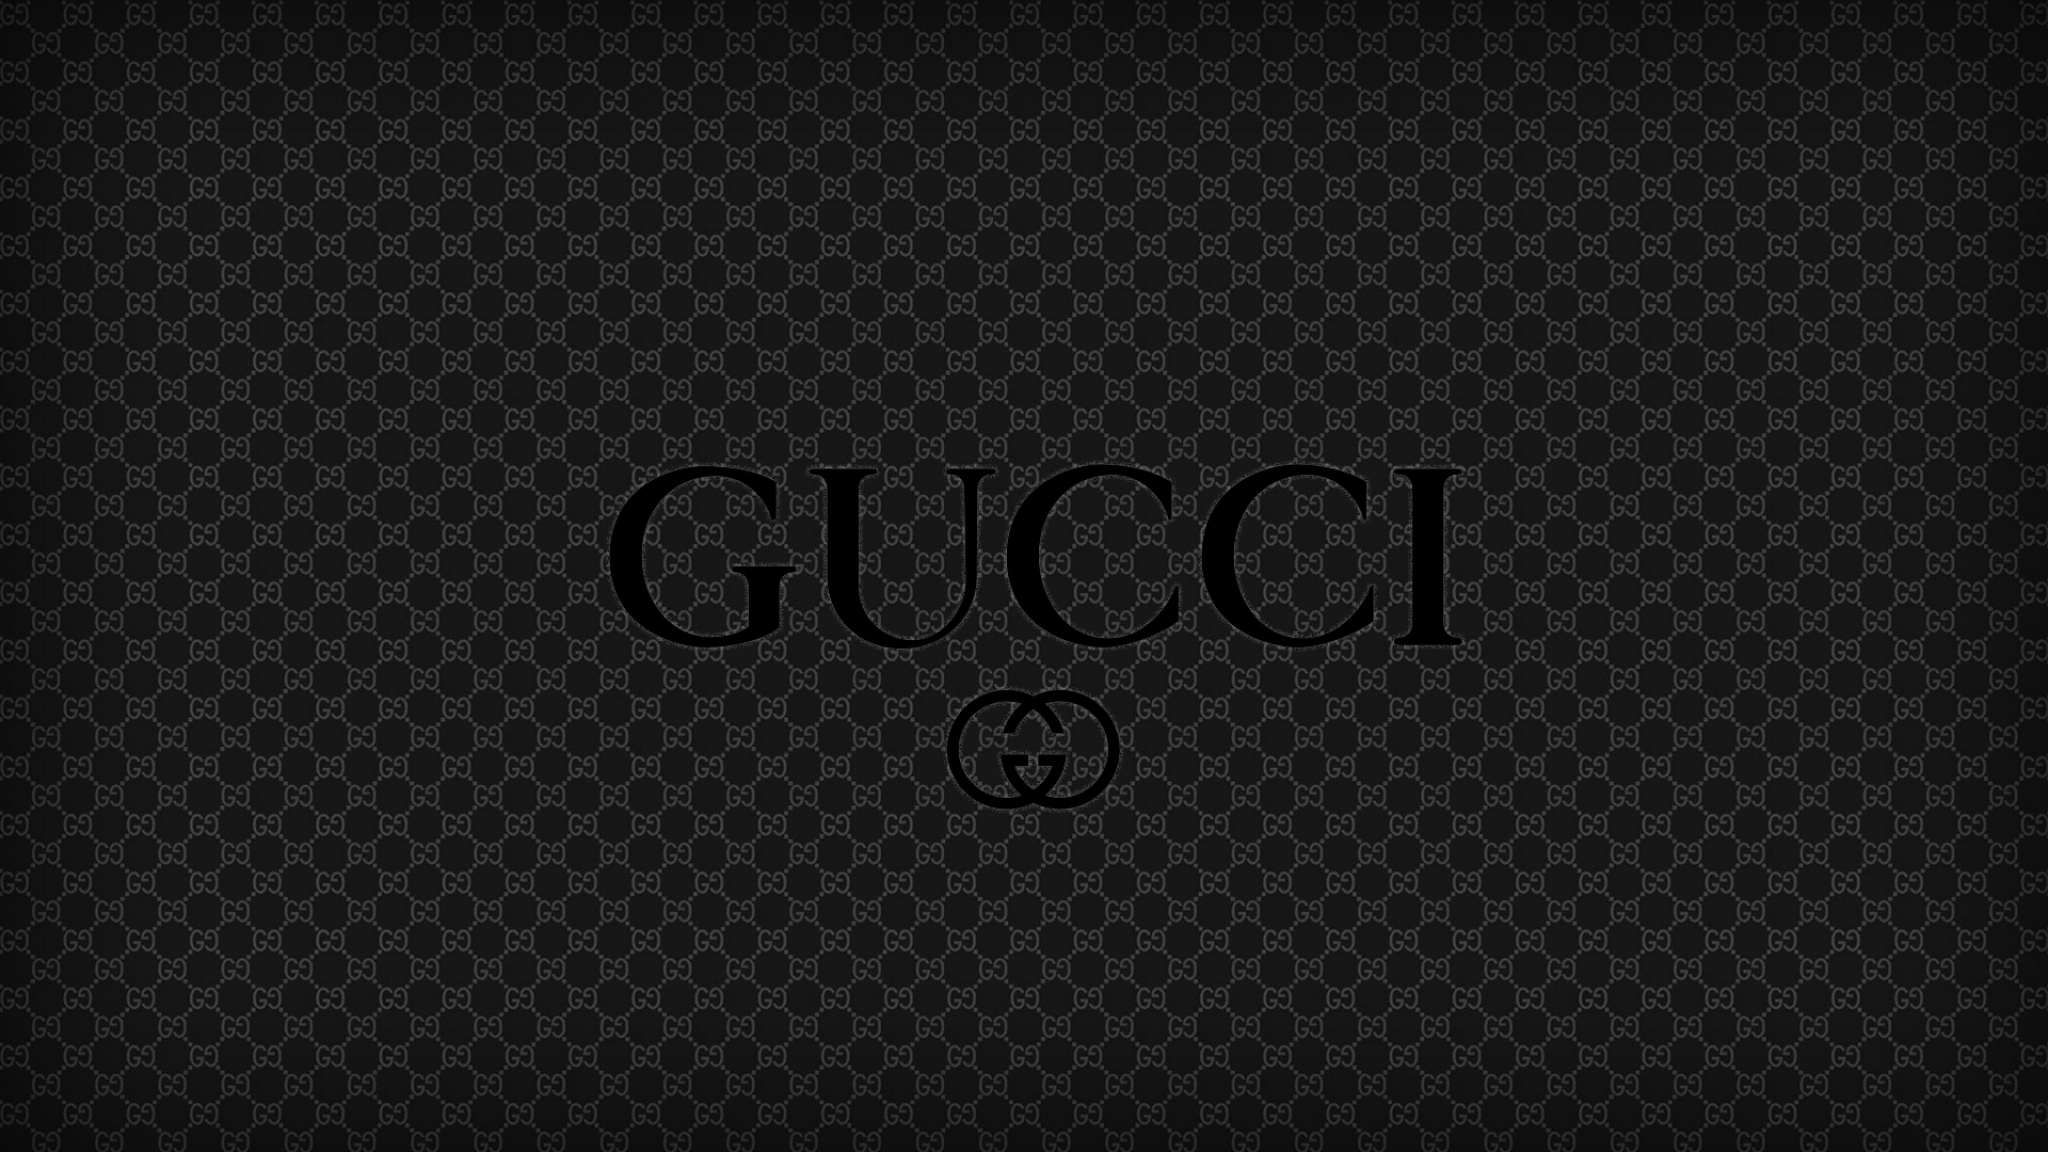 Gucci People Wallpapers - Wallpaper Cave